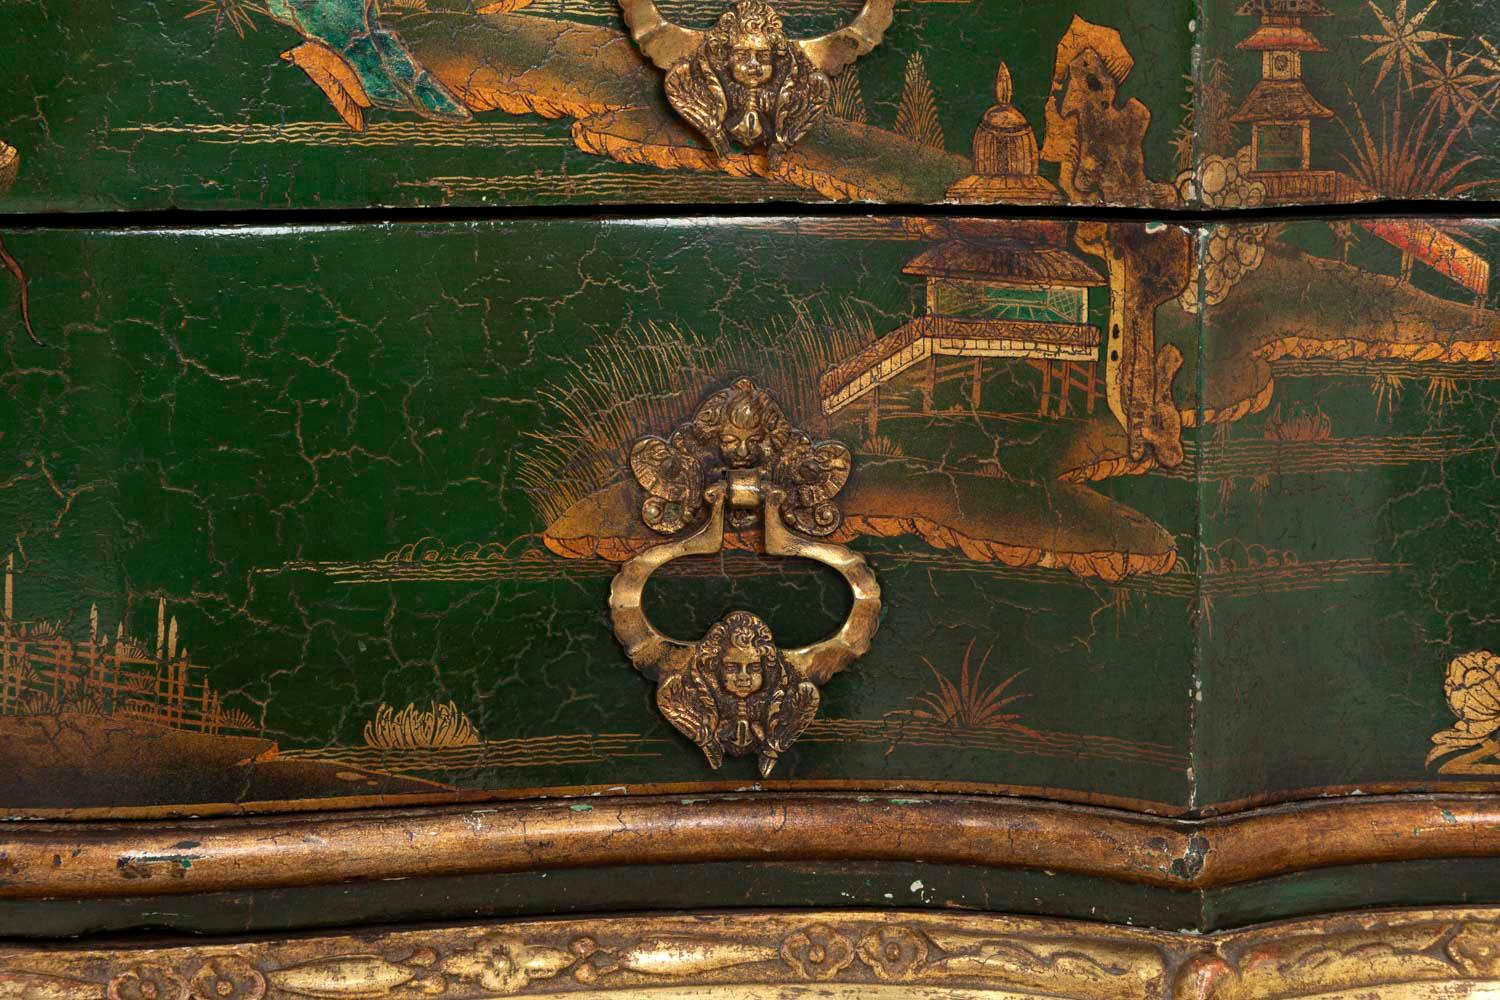 Serpentine Commode in Green Lacquered Wood, Chinese Decoration, 1950s (Bronze)